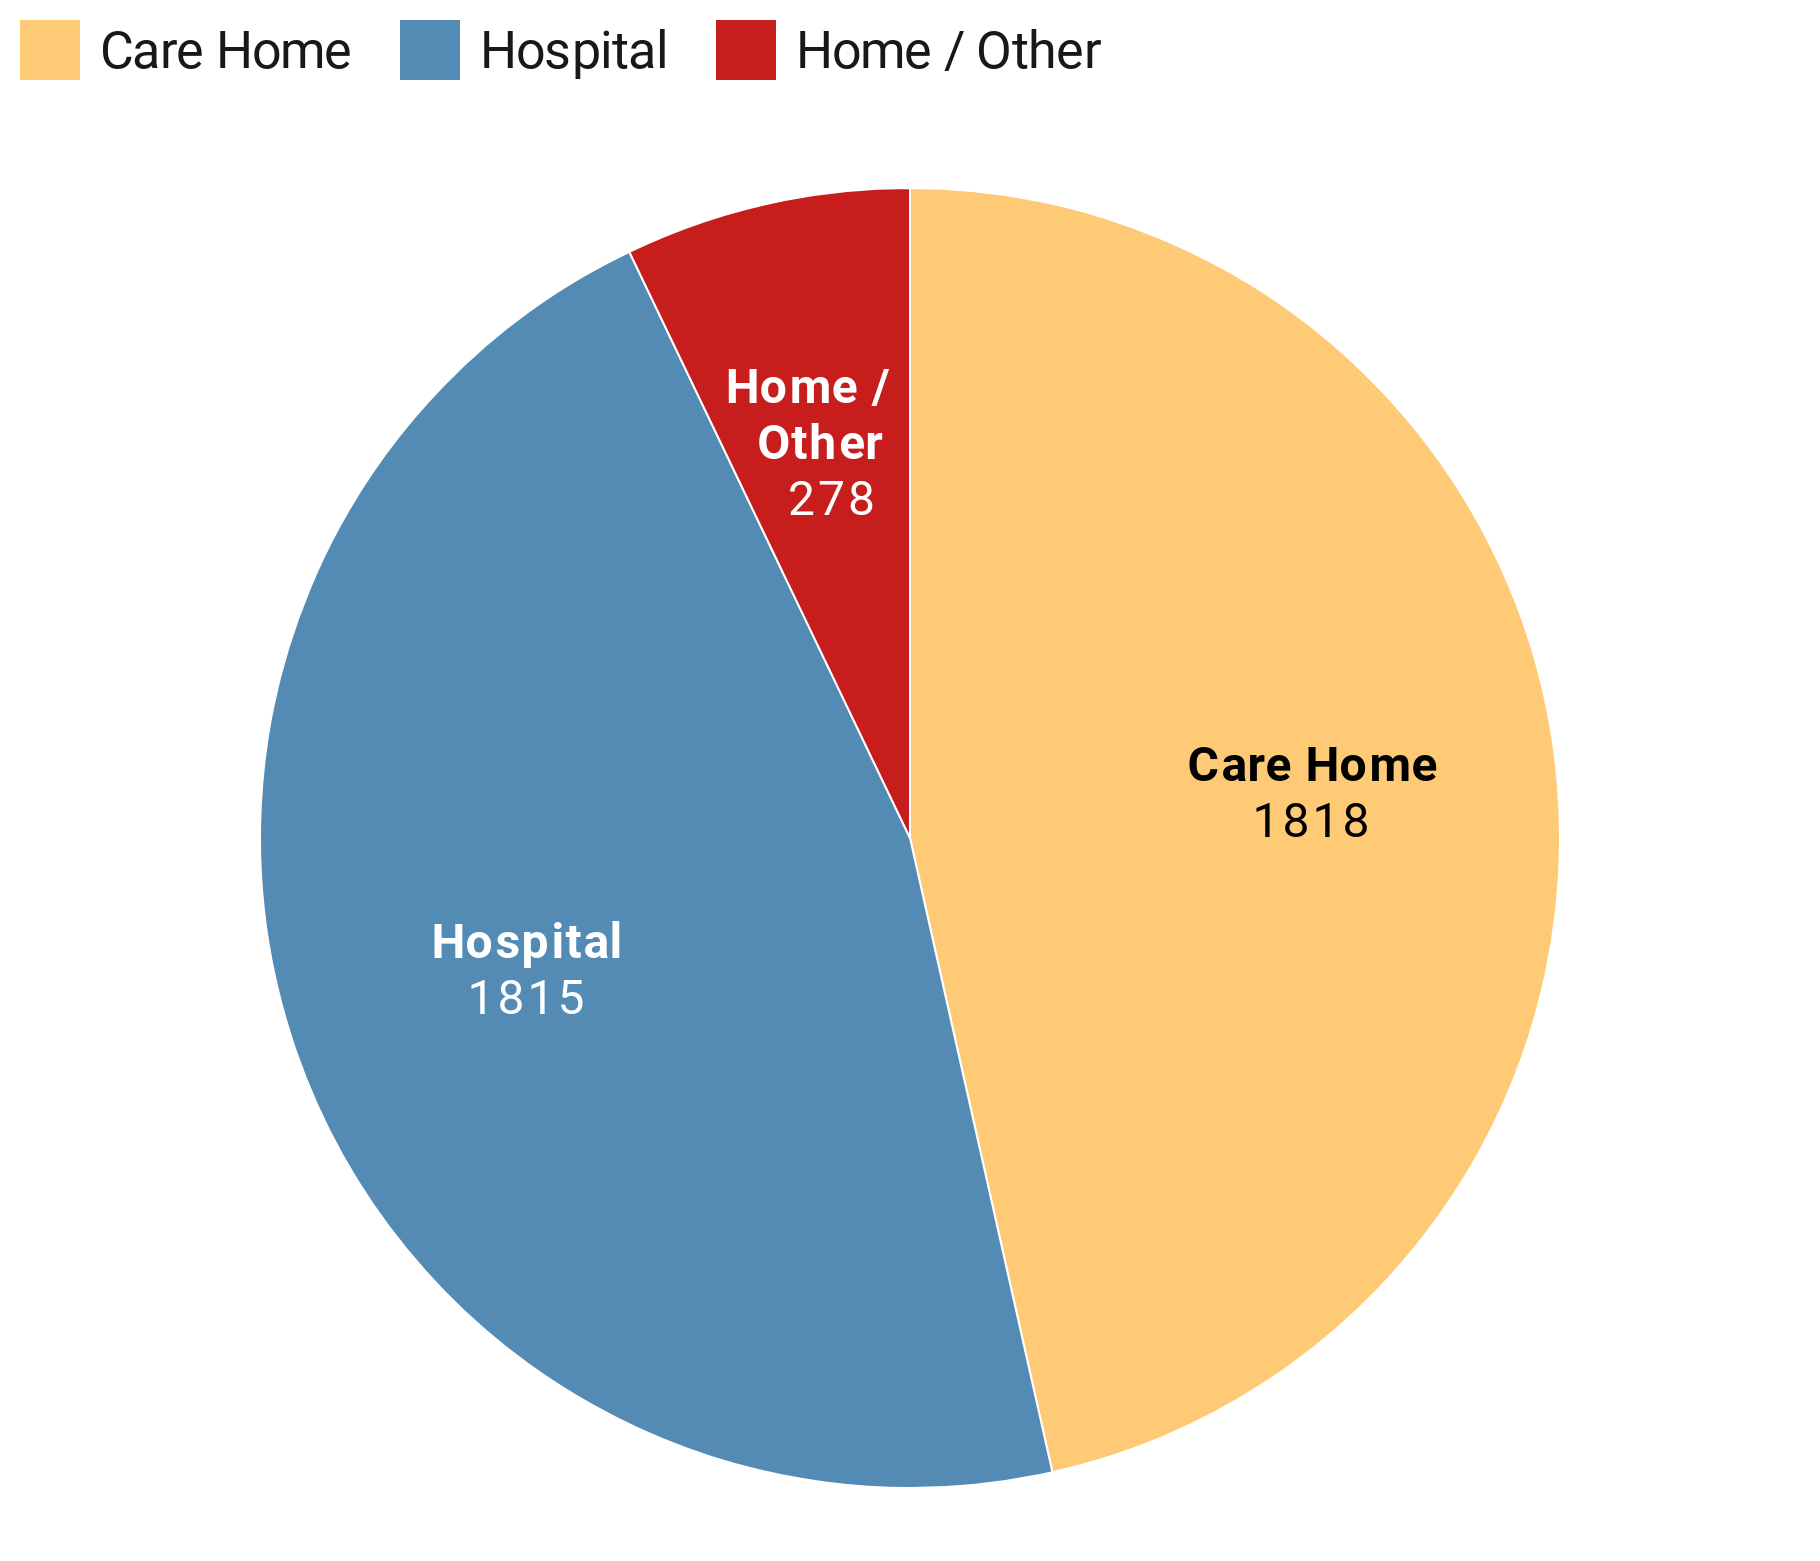 Care home deaths overtake hospital deaths. (Chart: STV News - Source: National Records of Scotland)